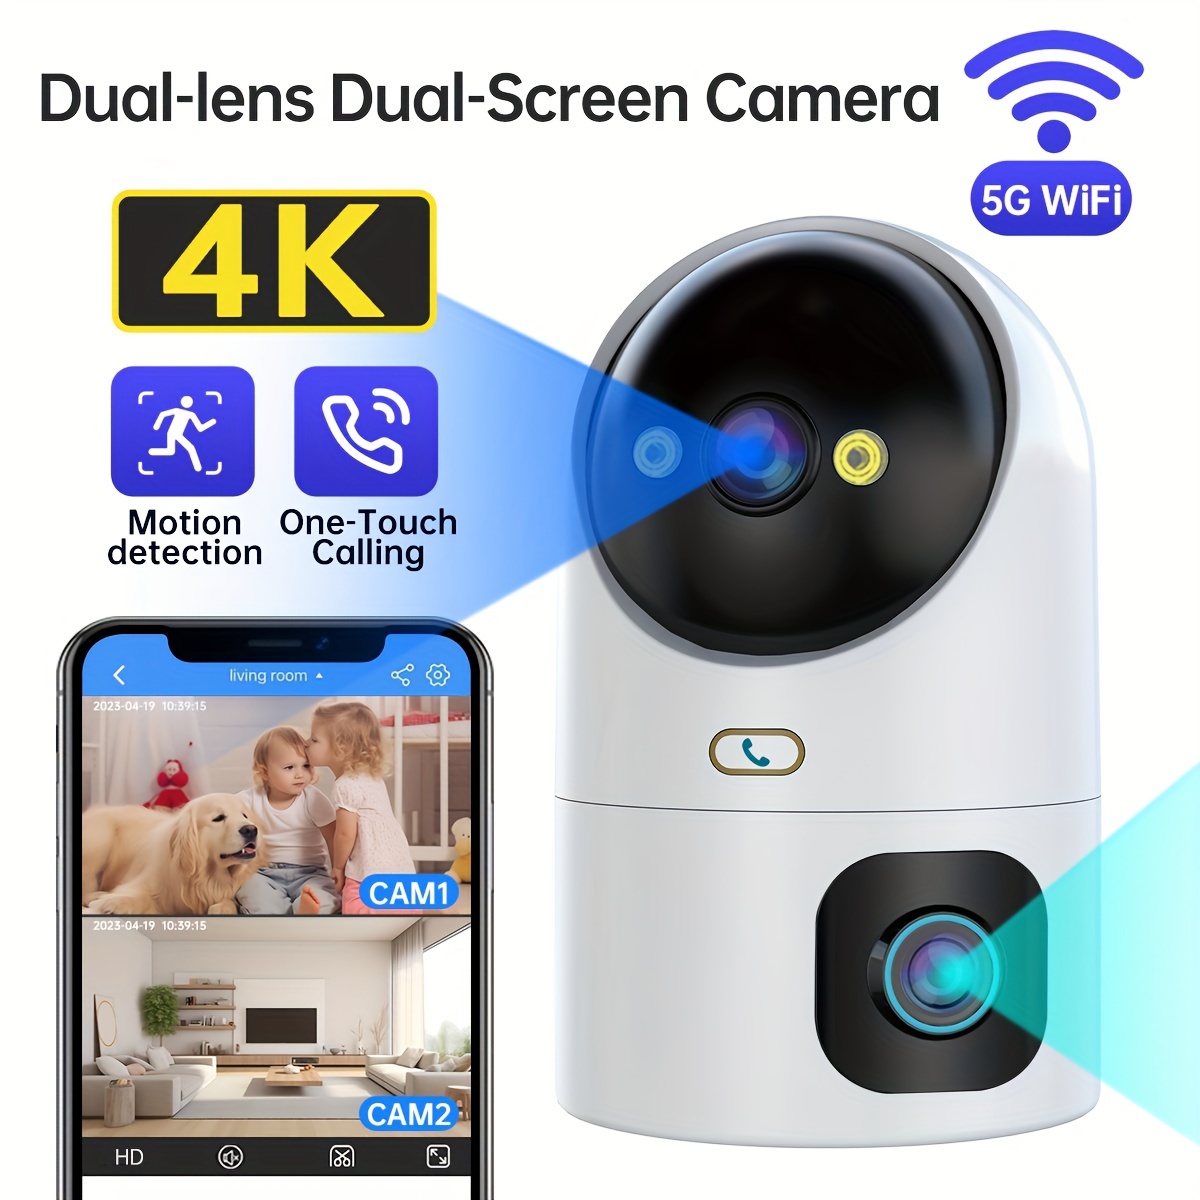 

4k Fhd Ptz Wireless Ip Camera 5g Wifi Dual Lens Dual Screen Camera Automatic Tracking Baby Care Day And Night Full Color Sound And Light Alert Voice Warning Monitor Street Security Camera